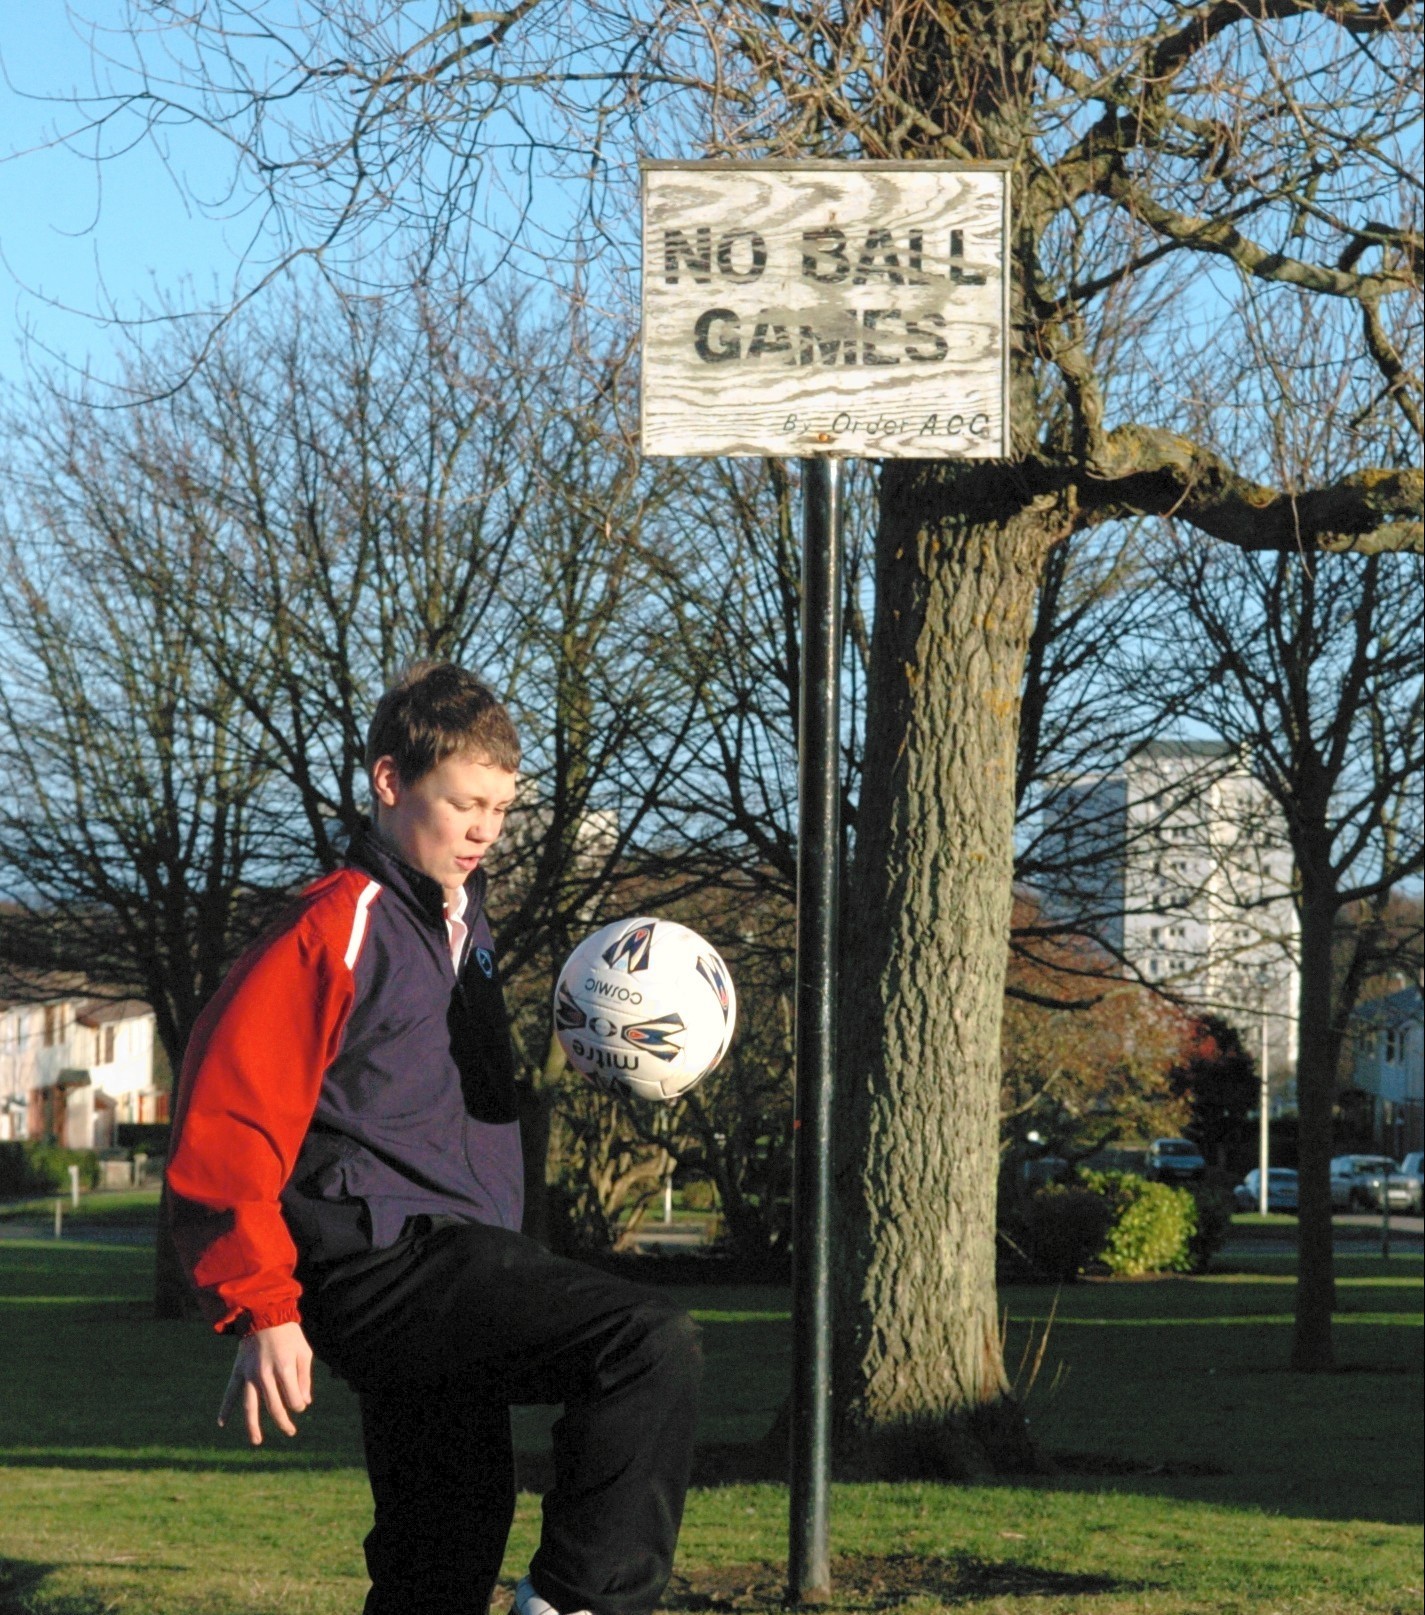 Northfield Academy pupil Kevin McAlley 14 plays football on the road close to a No Ball Games sign